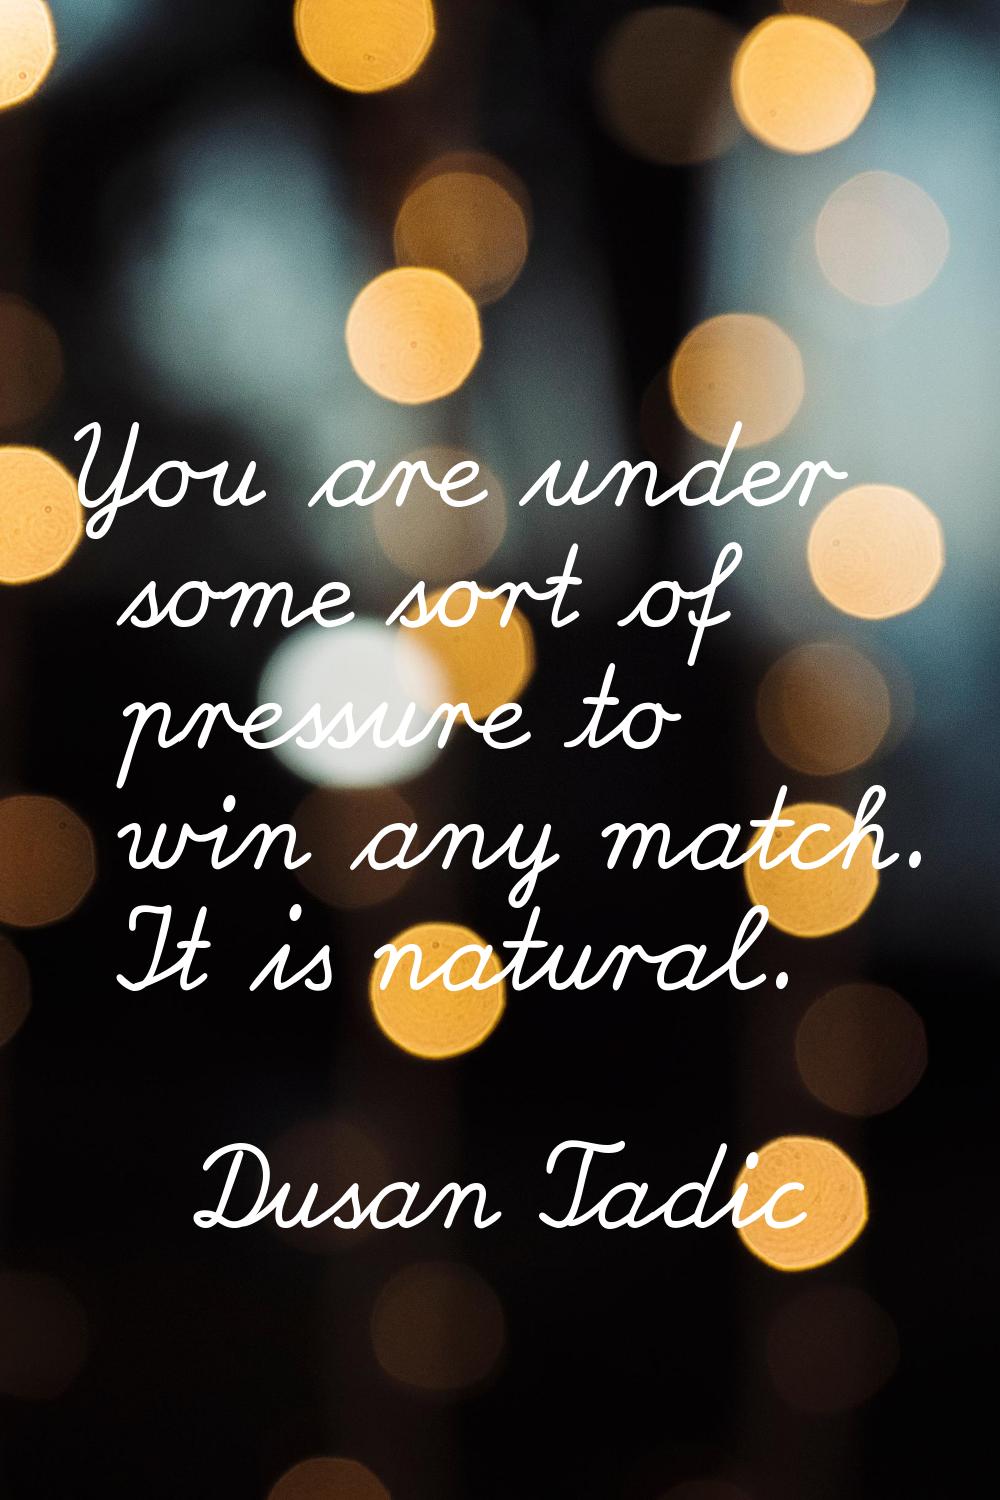 You are under some sort of pressure to win any match. It is natural.